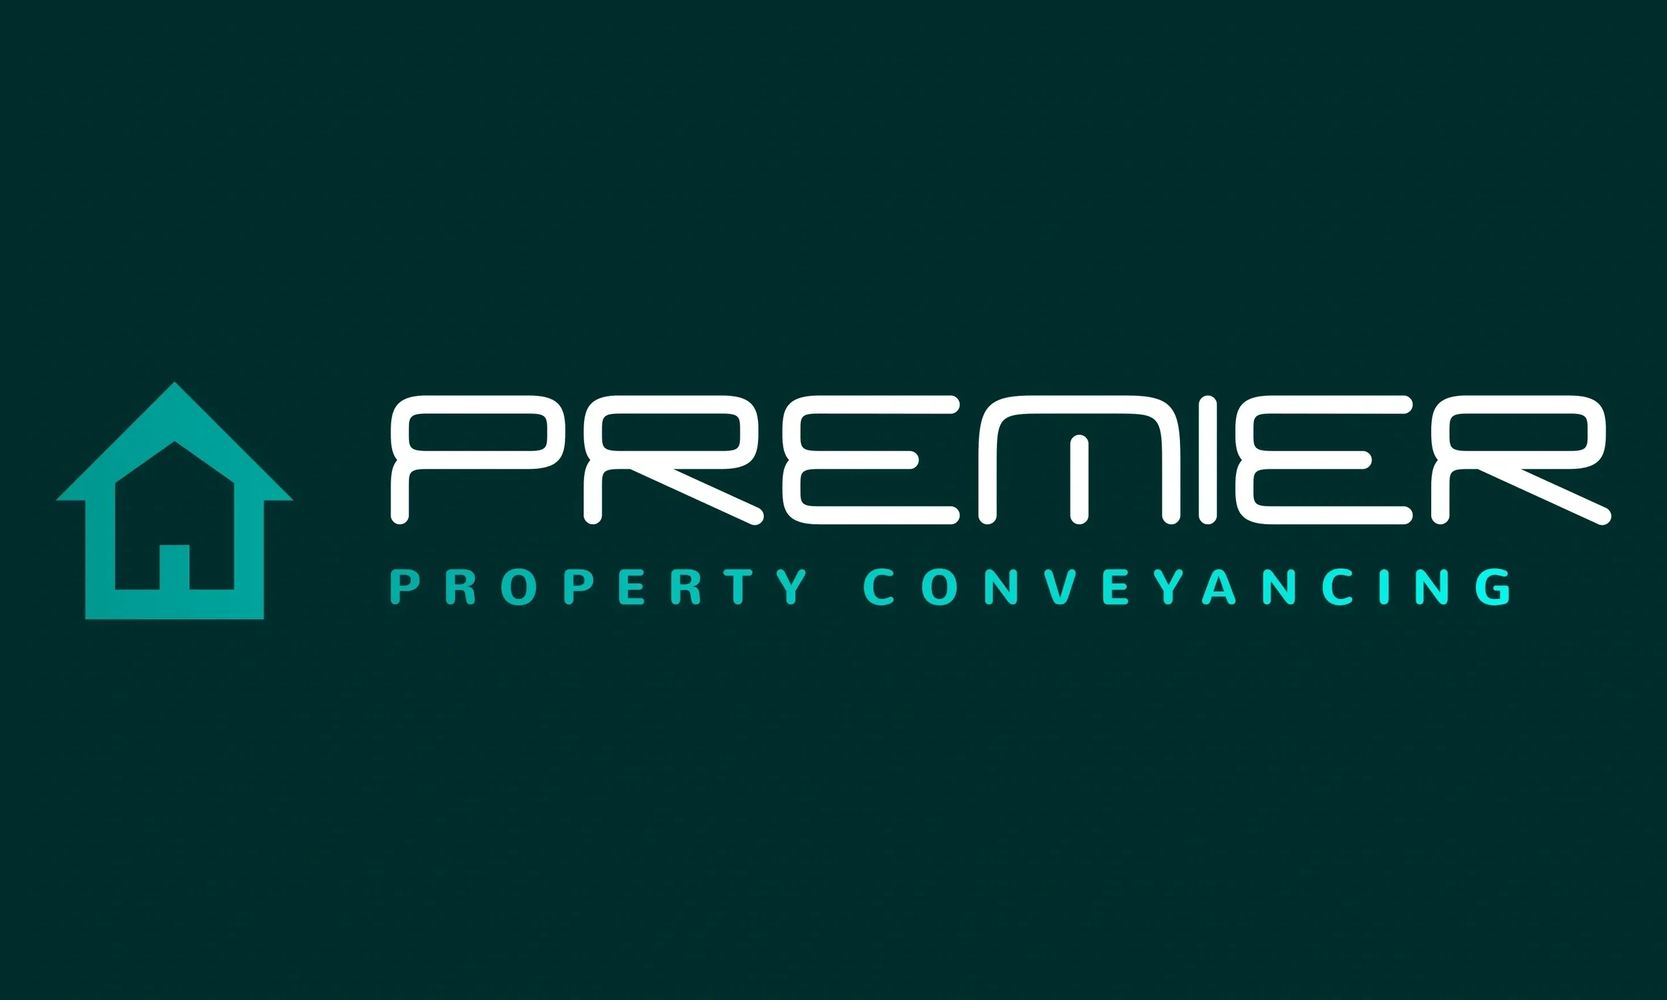 Property Conveyancing by Settlement Agent in Perth